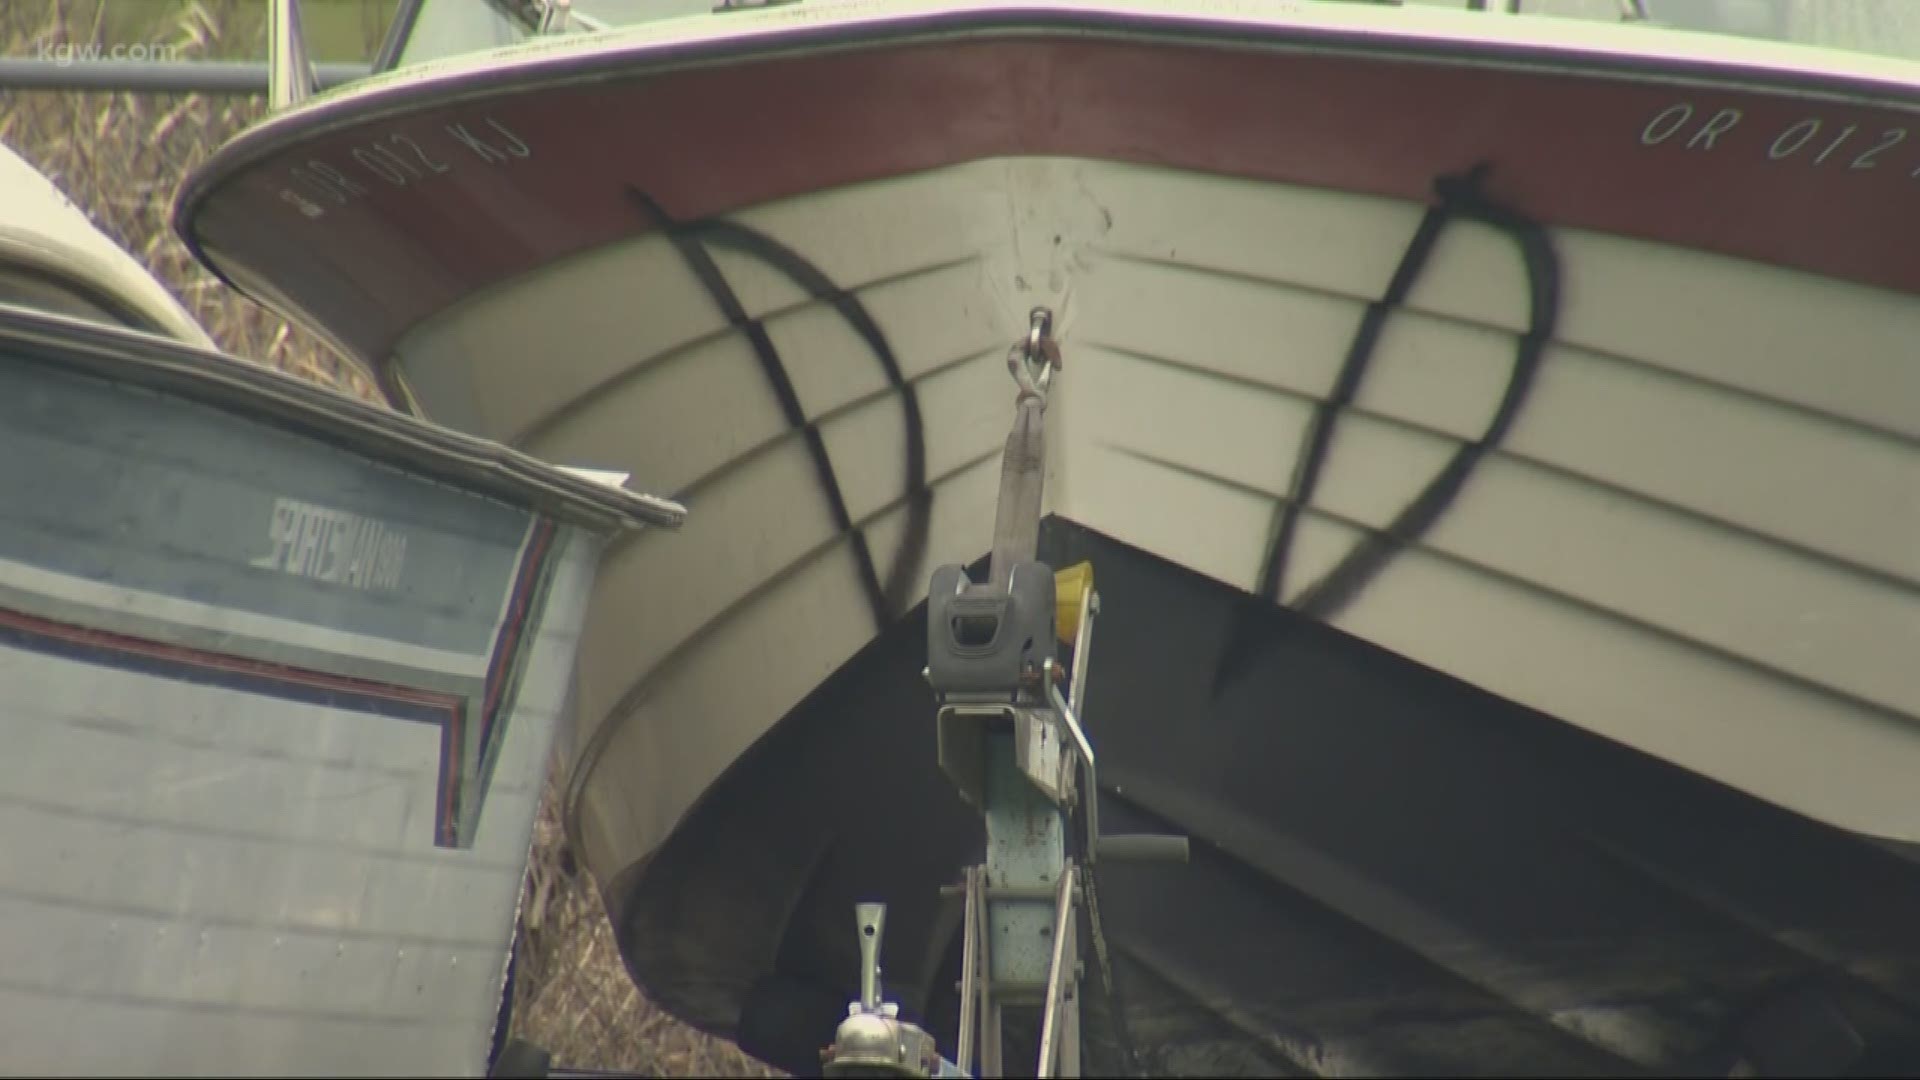 The cost of scrapping boats is leading to hazards in the Columbia River.